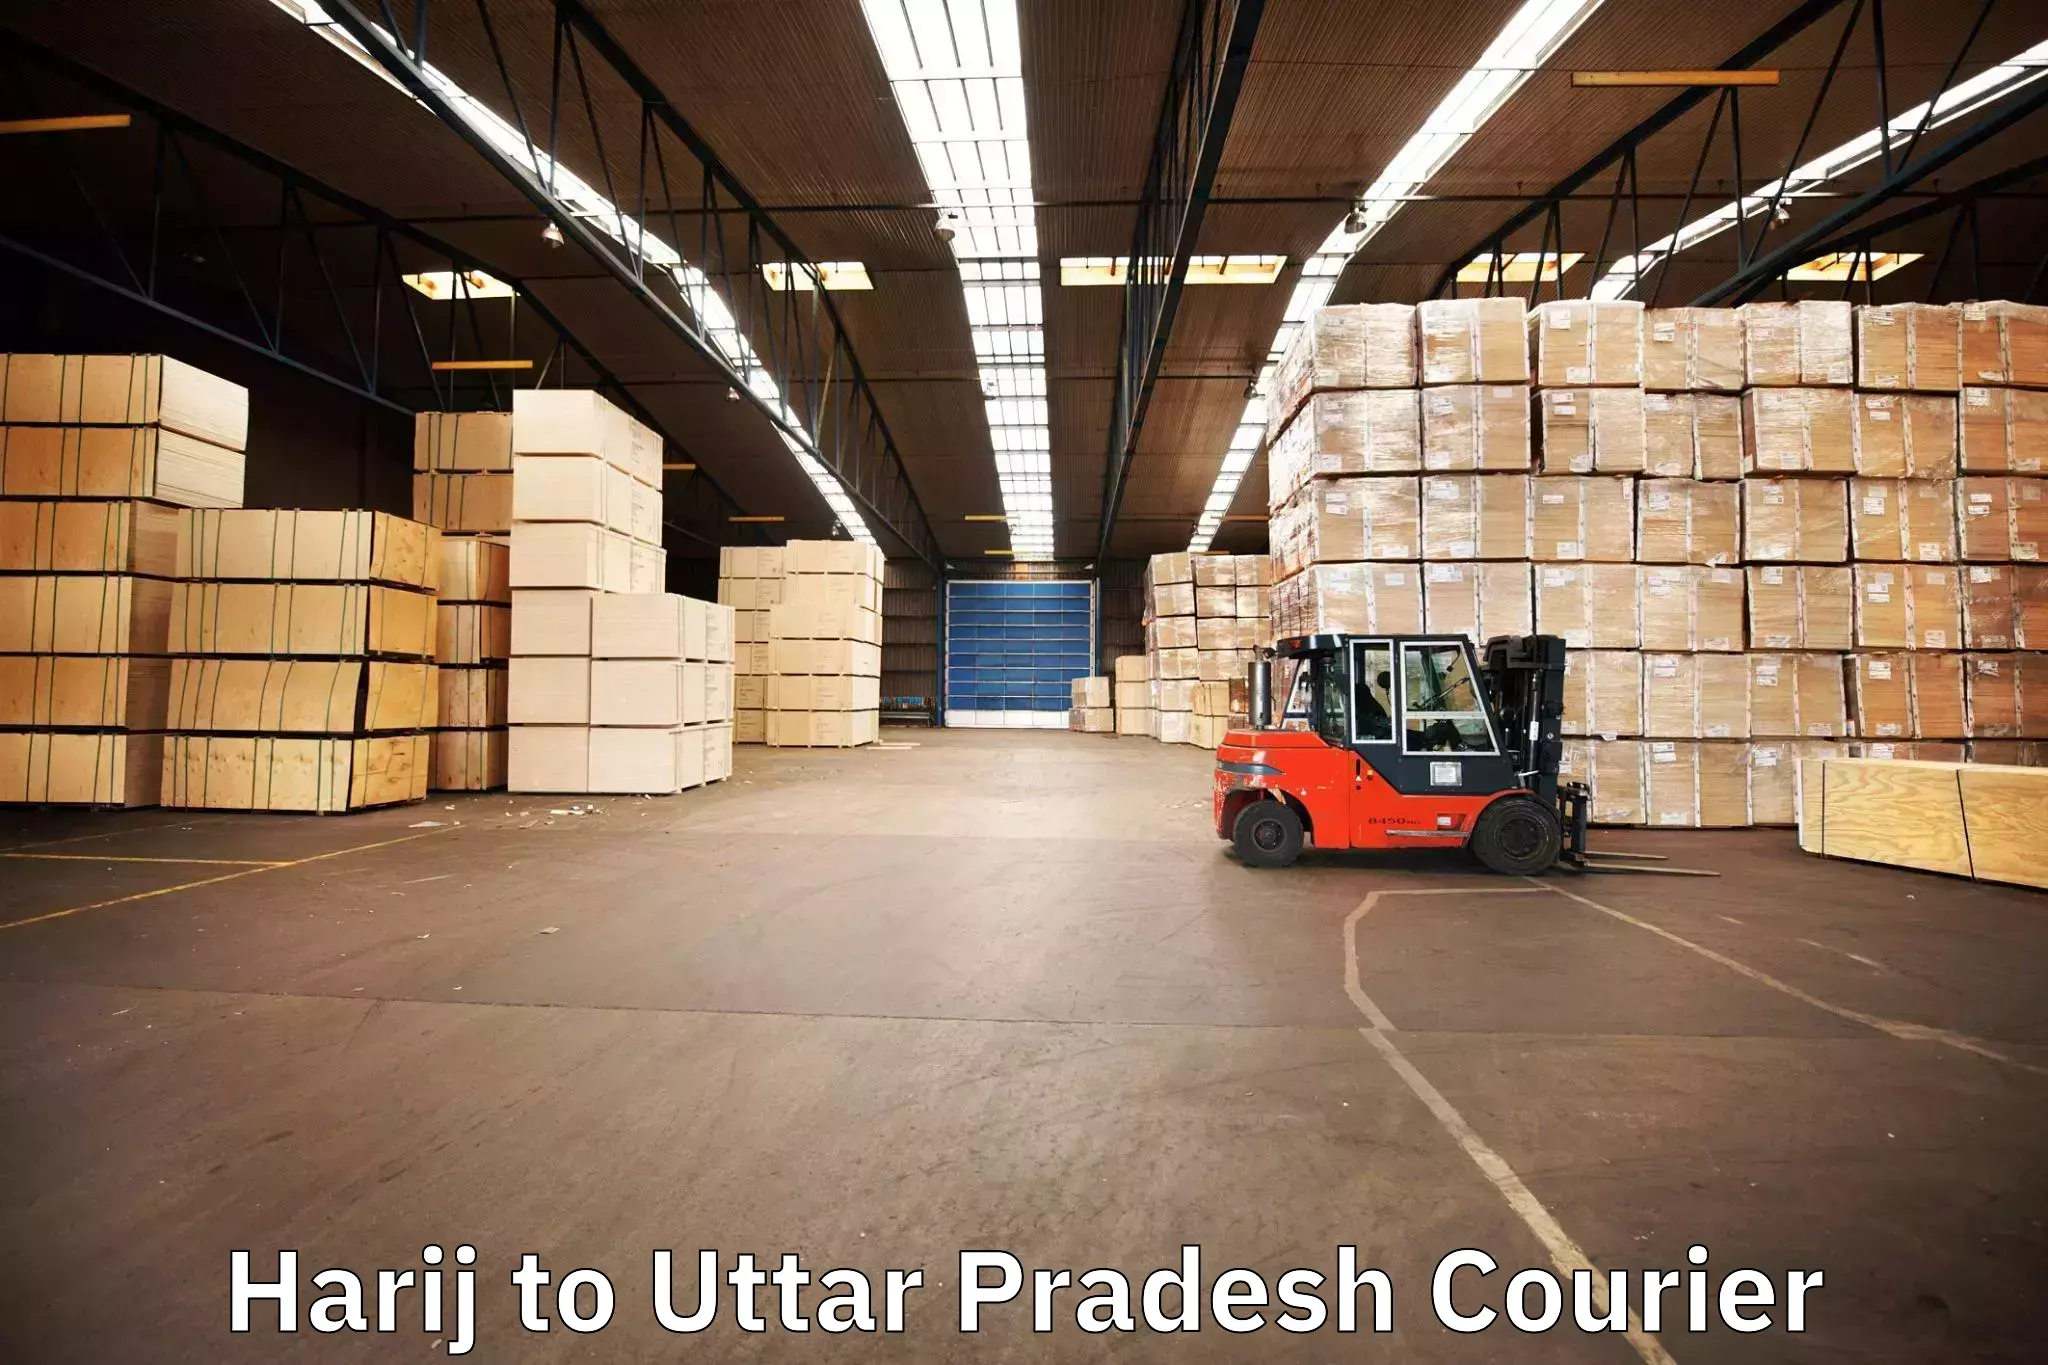 Moving and storage services in Harij to Aligarh